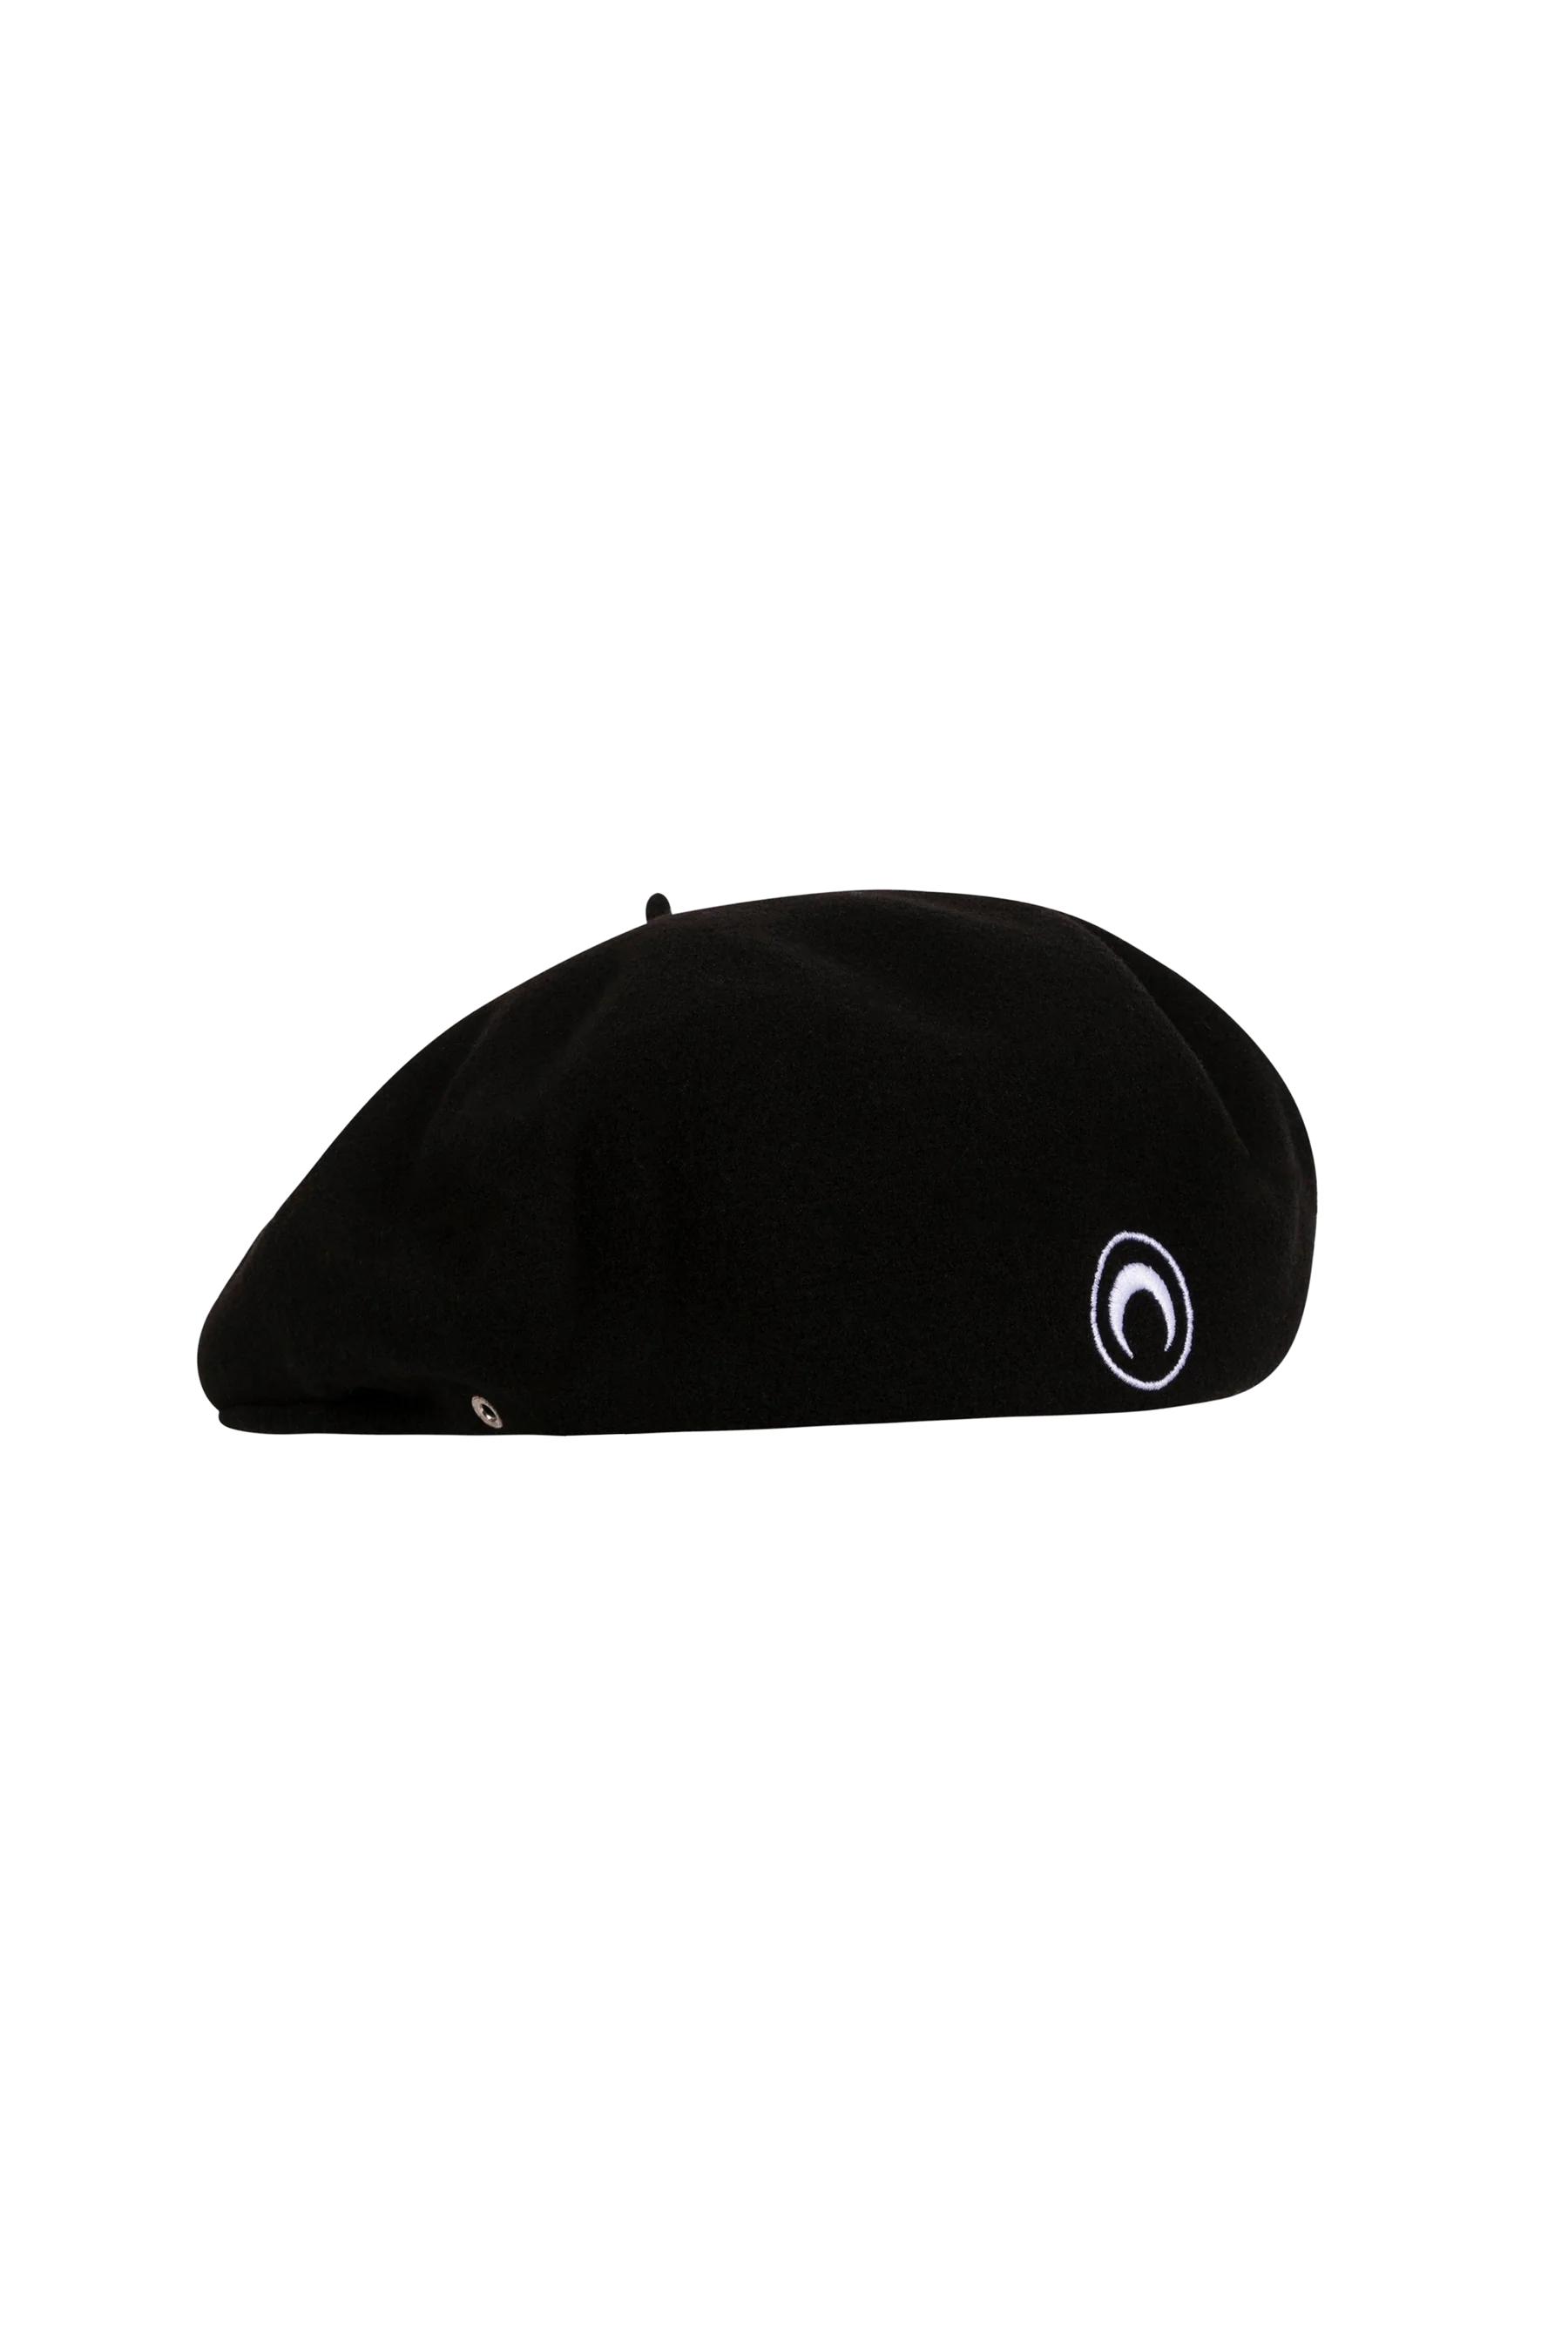 Marine Serre Embroidered French Beret in Black | Lyst